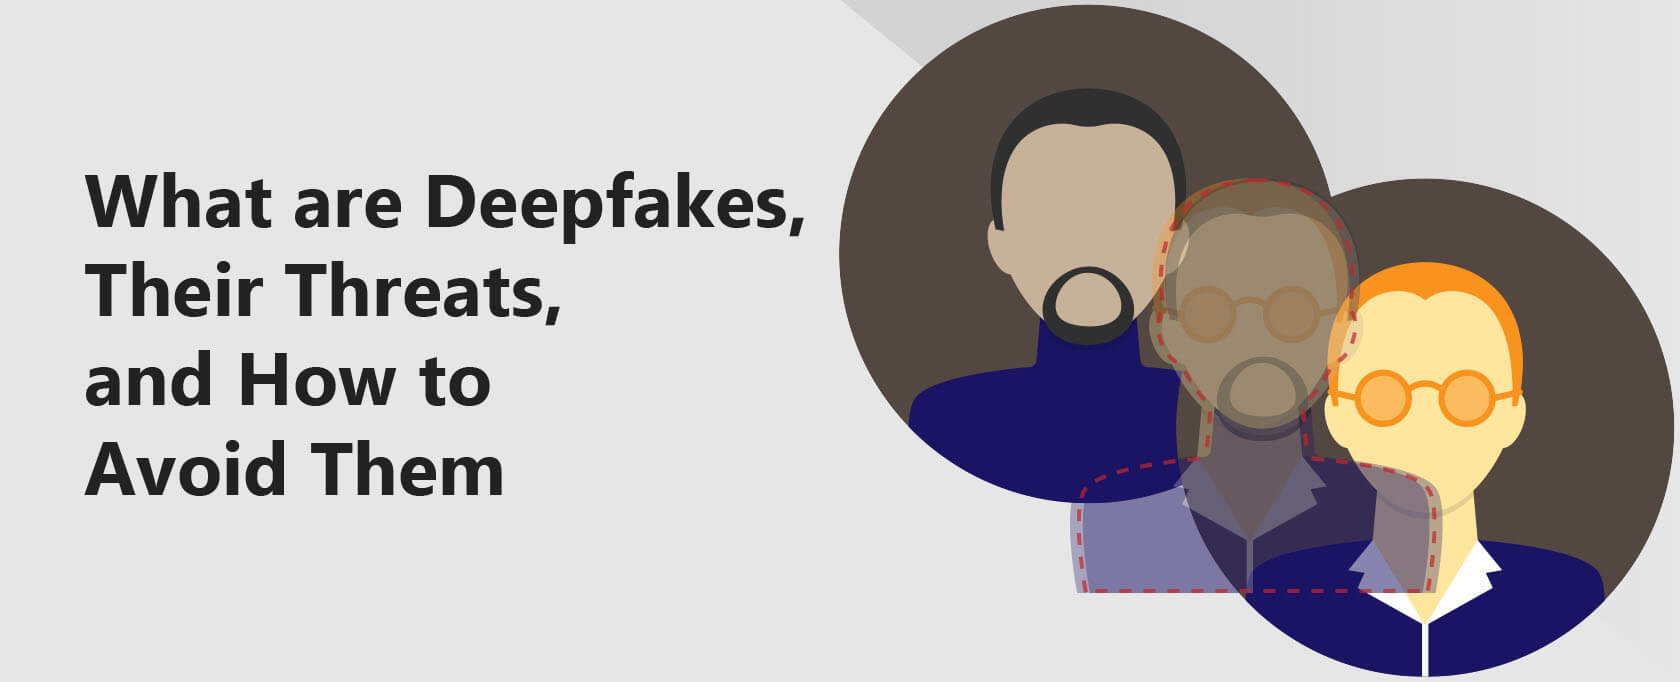 What are Deepfakes, Their Threats, and How to Avoid Them?